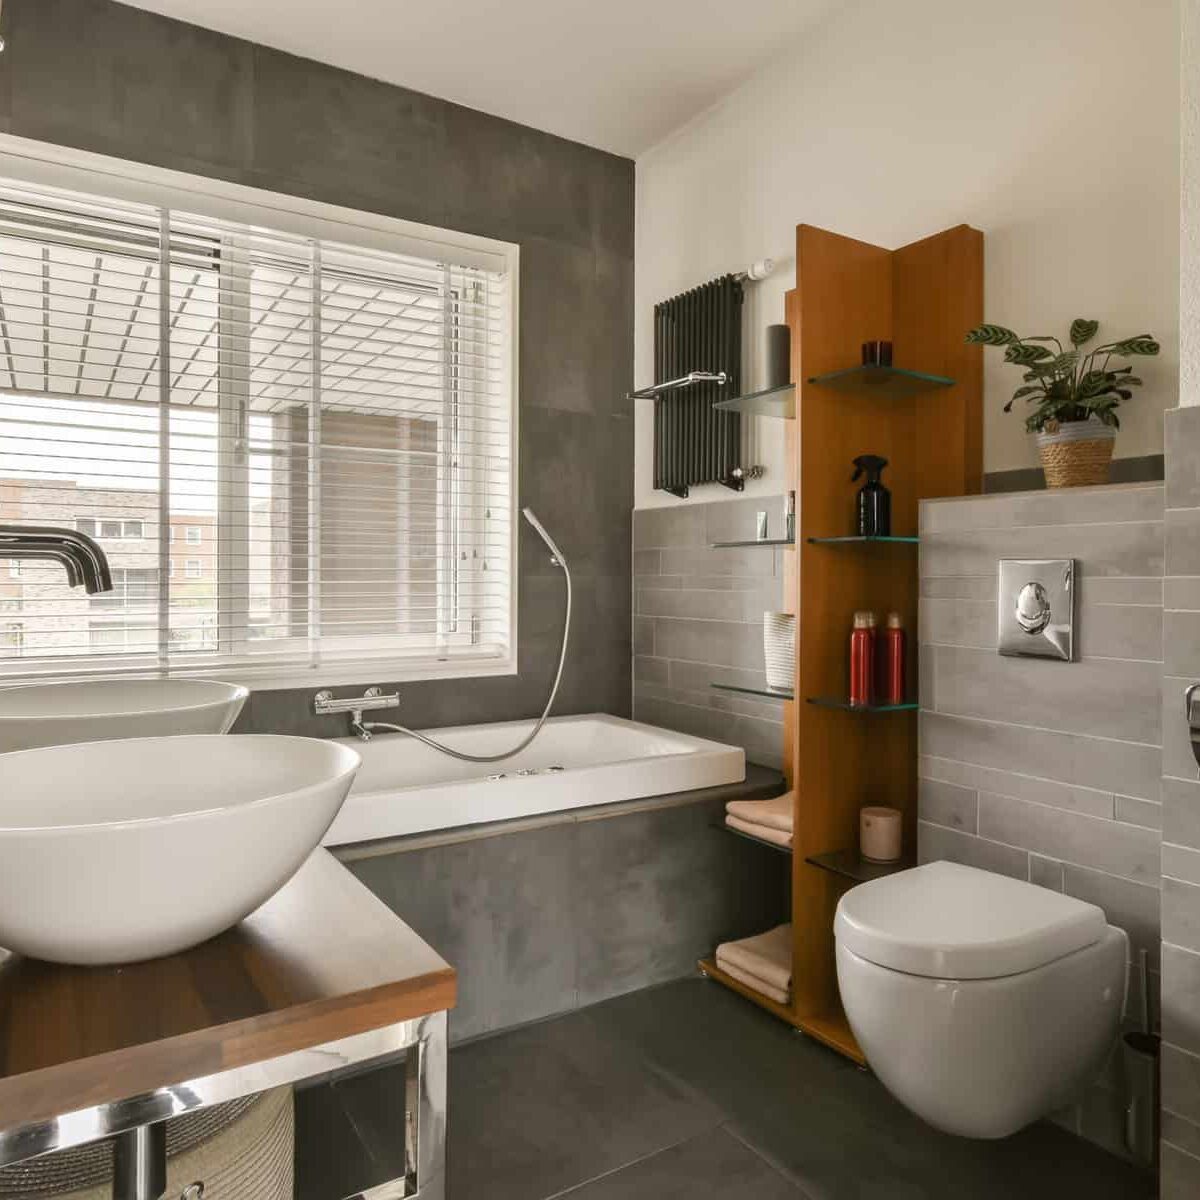 a bathroom with a sink, toilet and window in the back wall is made of dark grey tiles on the floor